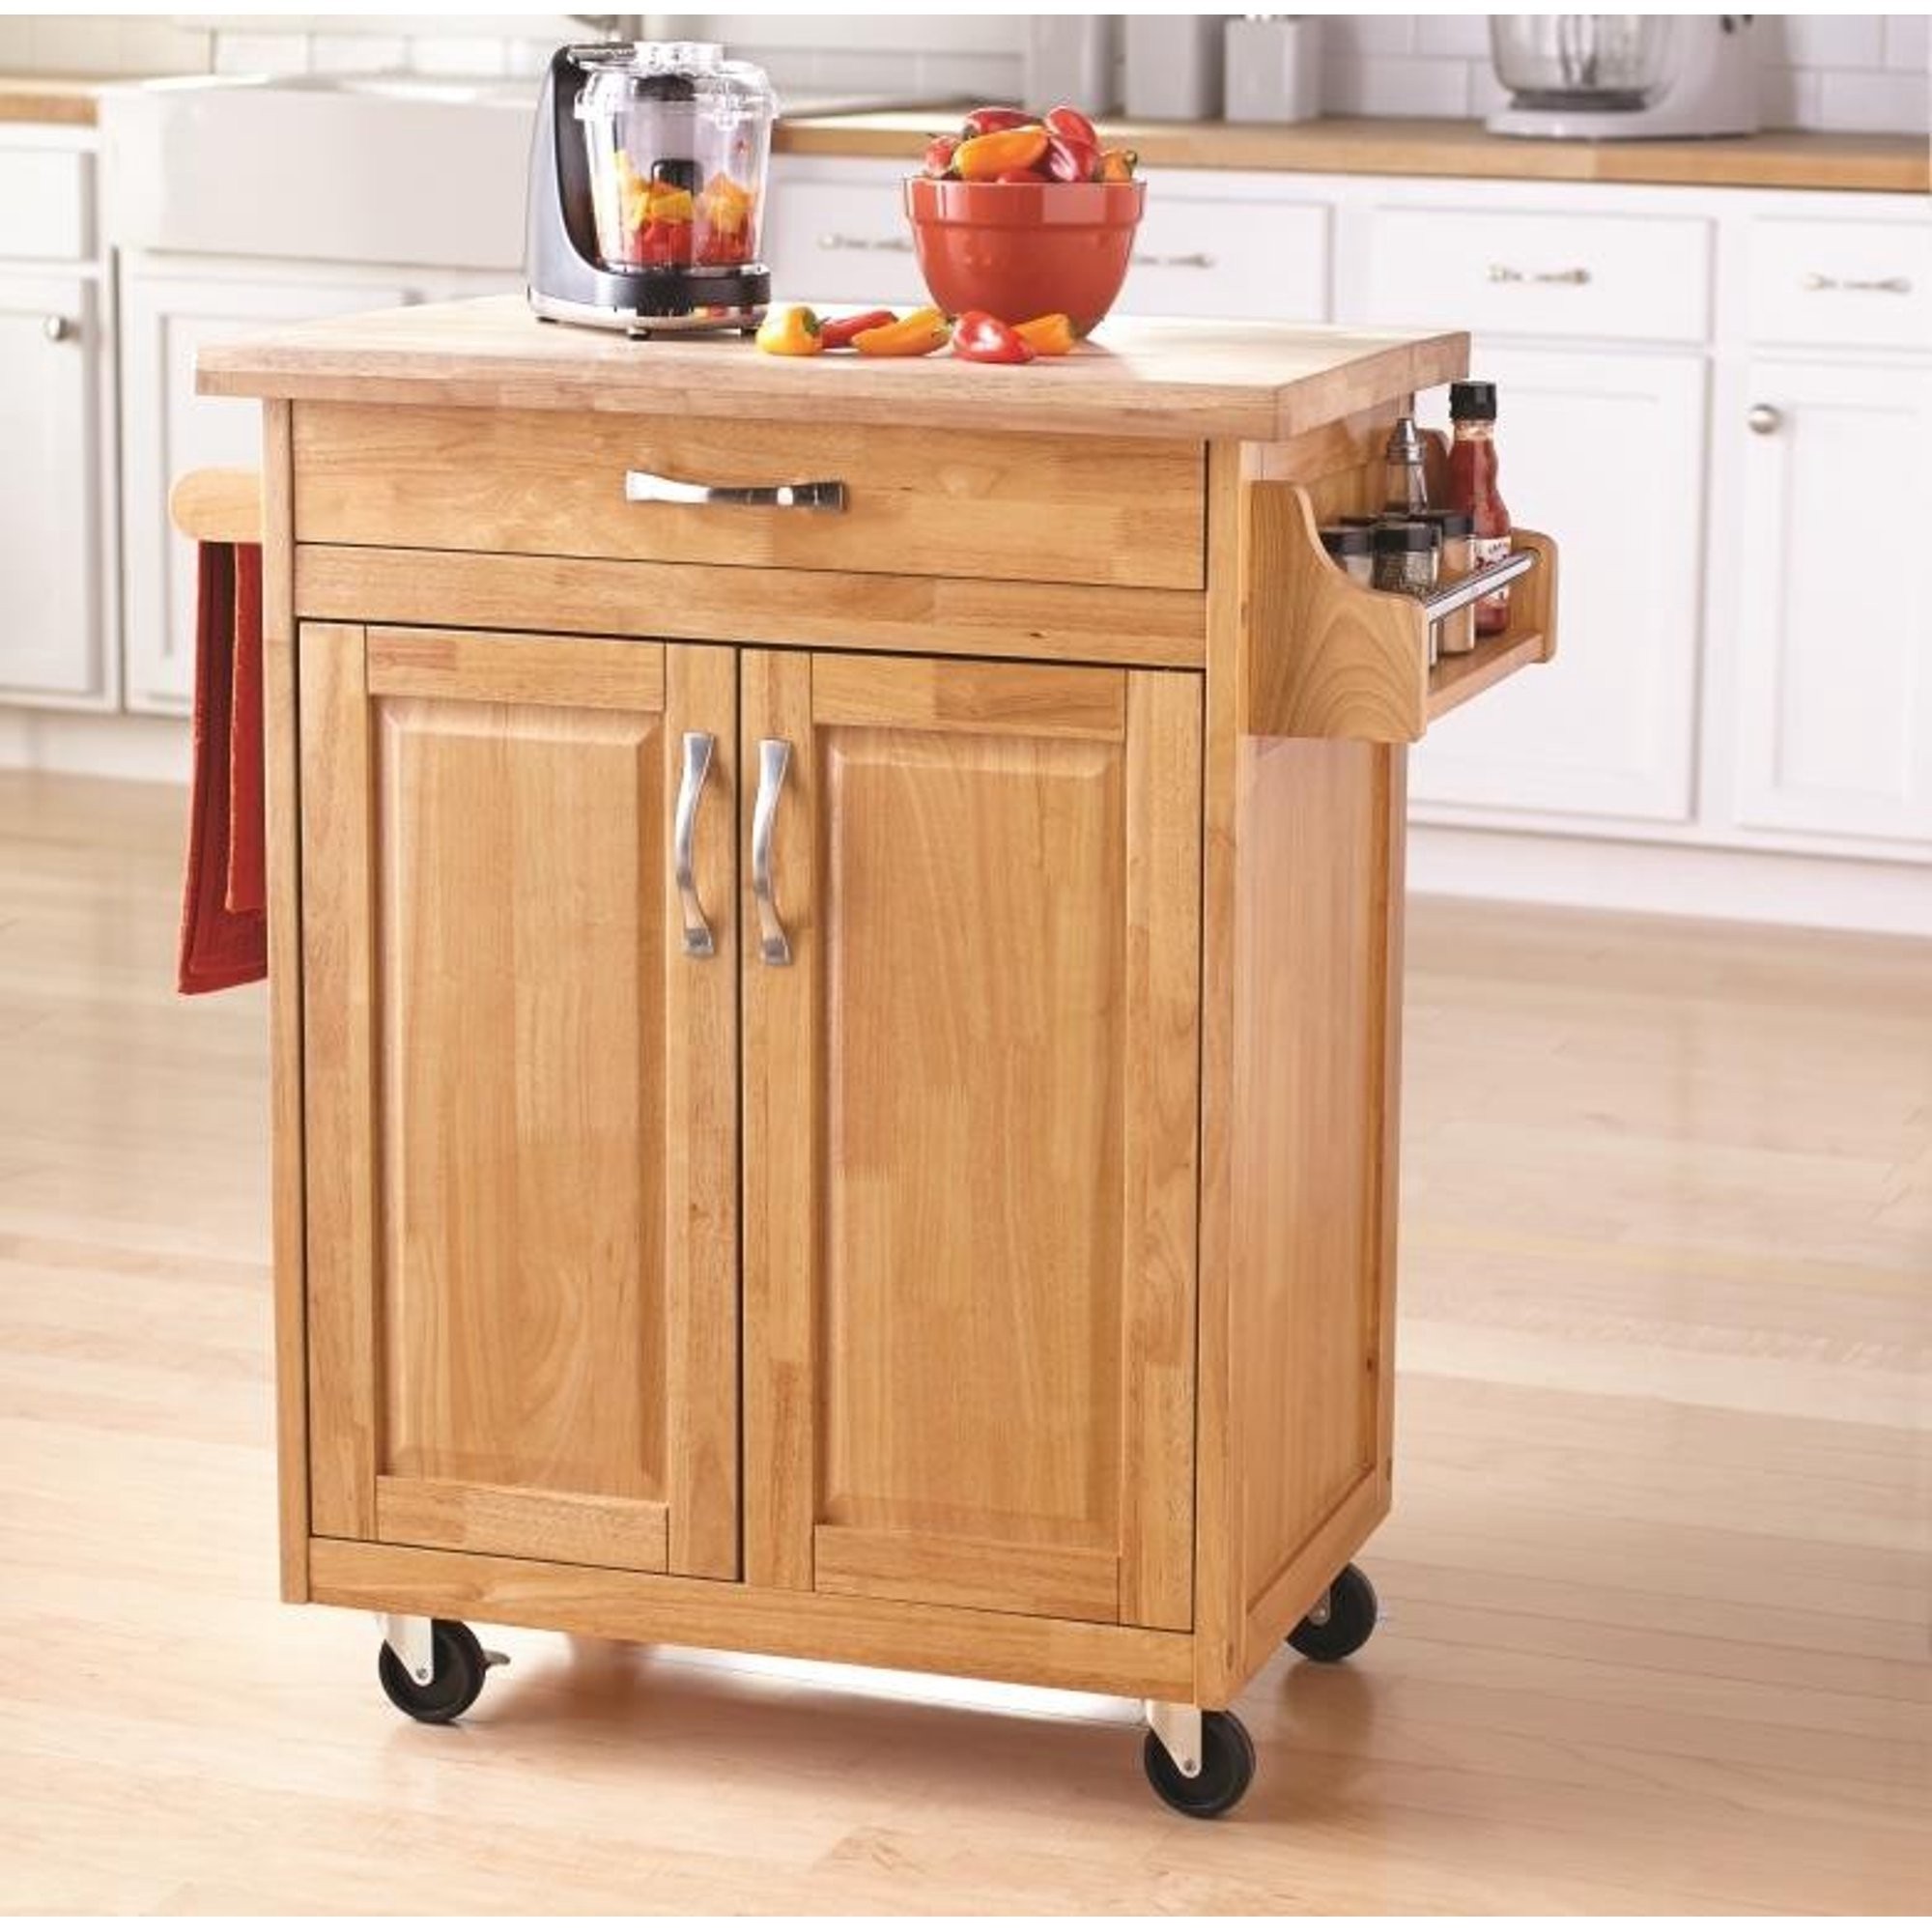 Mainstays Kitchen Island Cart, Natural. This Stylish Kitchen Furniture Has a Solid Wood Top. Kitchen Island SALE!! Drawer and Cupboard Provide All Your Kitchen Storage Needs. Sturdy Wheels For Moving Around. Towel Bar and Spice Rack.